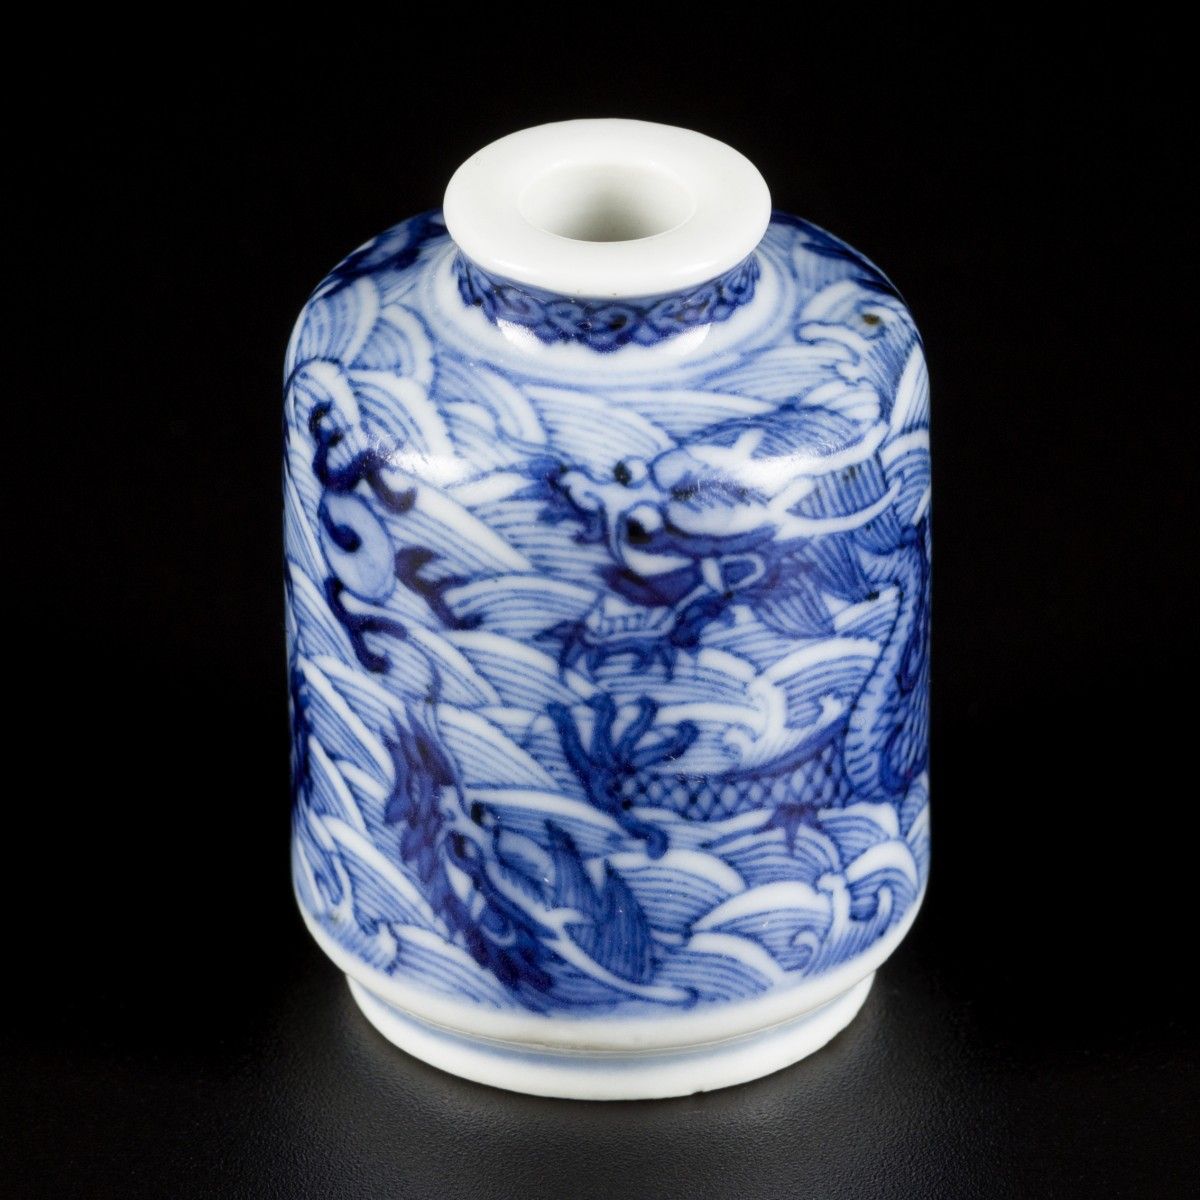 A porcelain snuff bottle with dragon decoration, China, circa 1800. H. 4,5 cm. S&hellip;